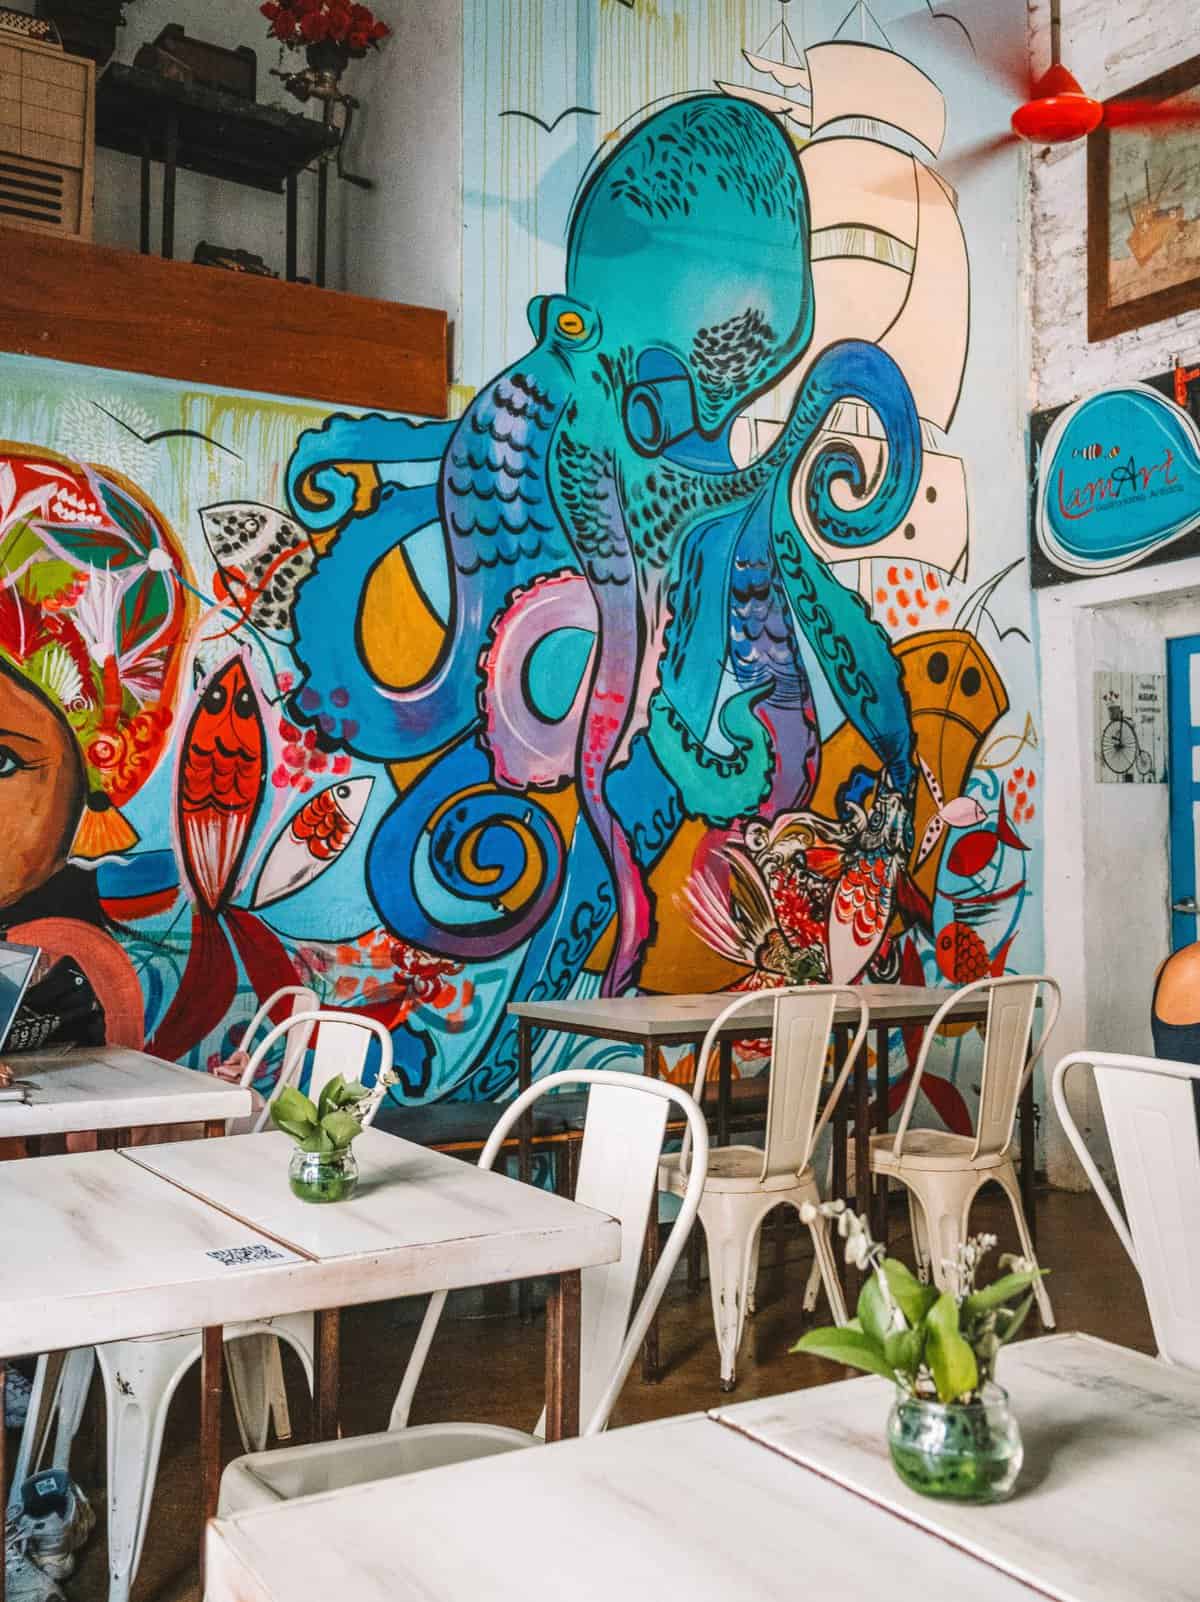 A colorful mural adorning the wall of Restaurante LaMart—one of the best restaurants in Santa Marta, Colombia.